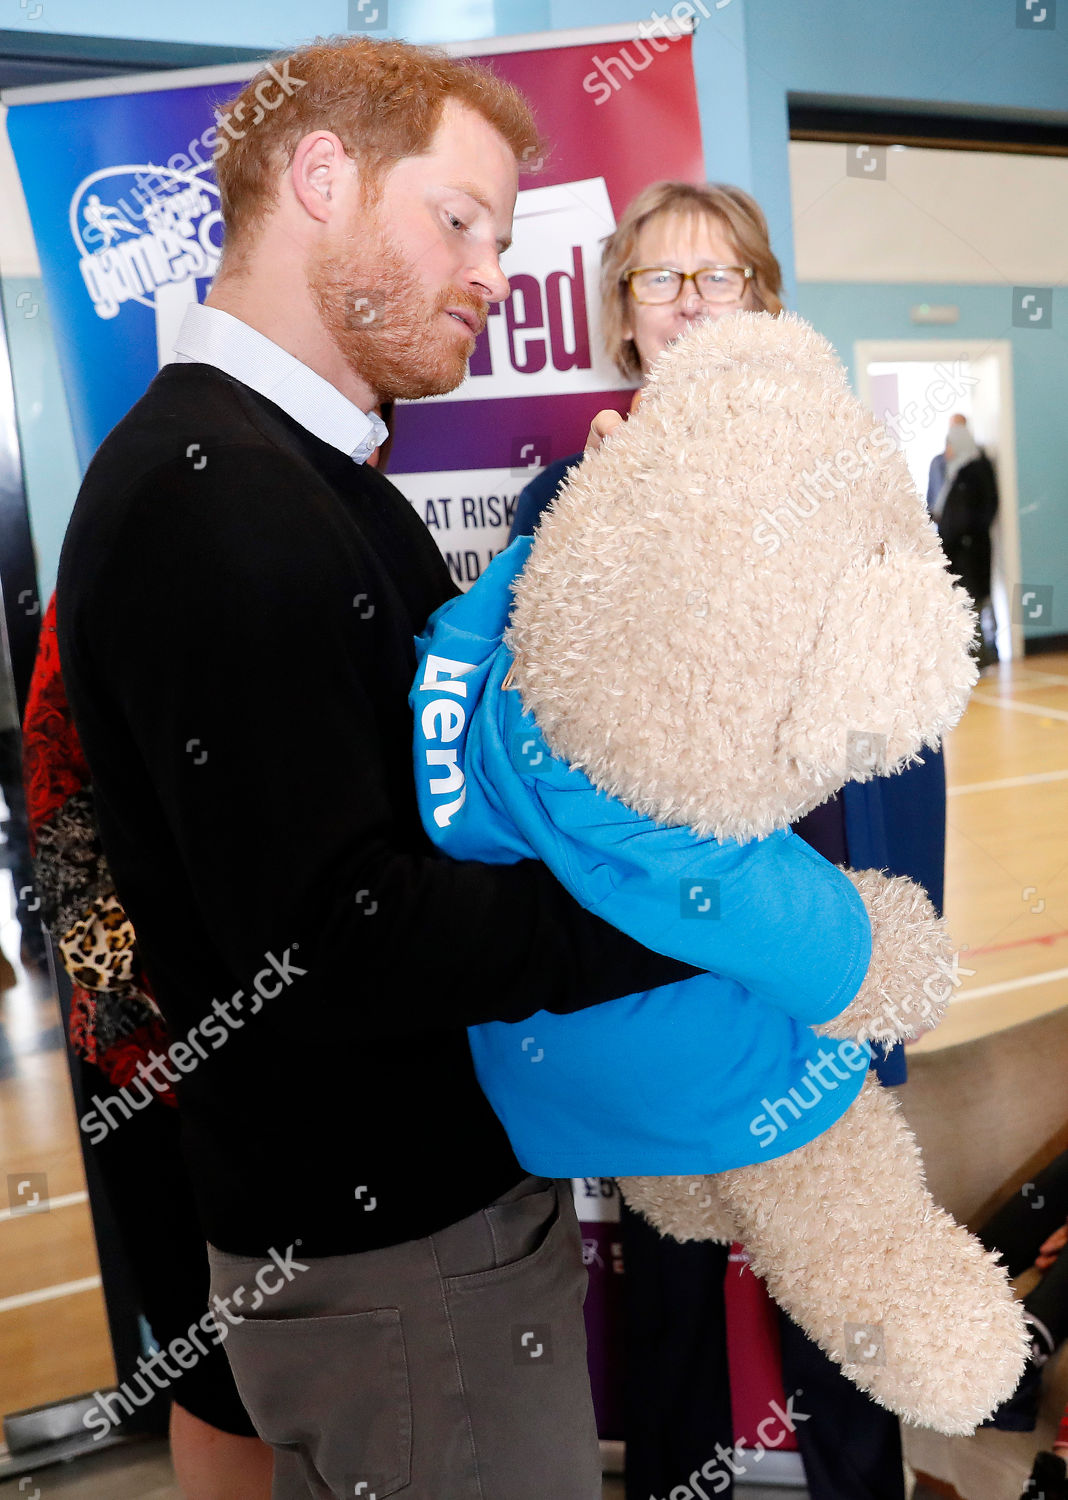 prince-harry-visit-to-fit-and-fed-half-term-initiative-streatham-london-uk-shutterstock-editorial-10110713y.jpg